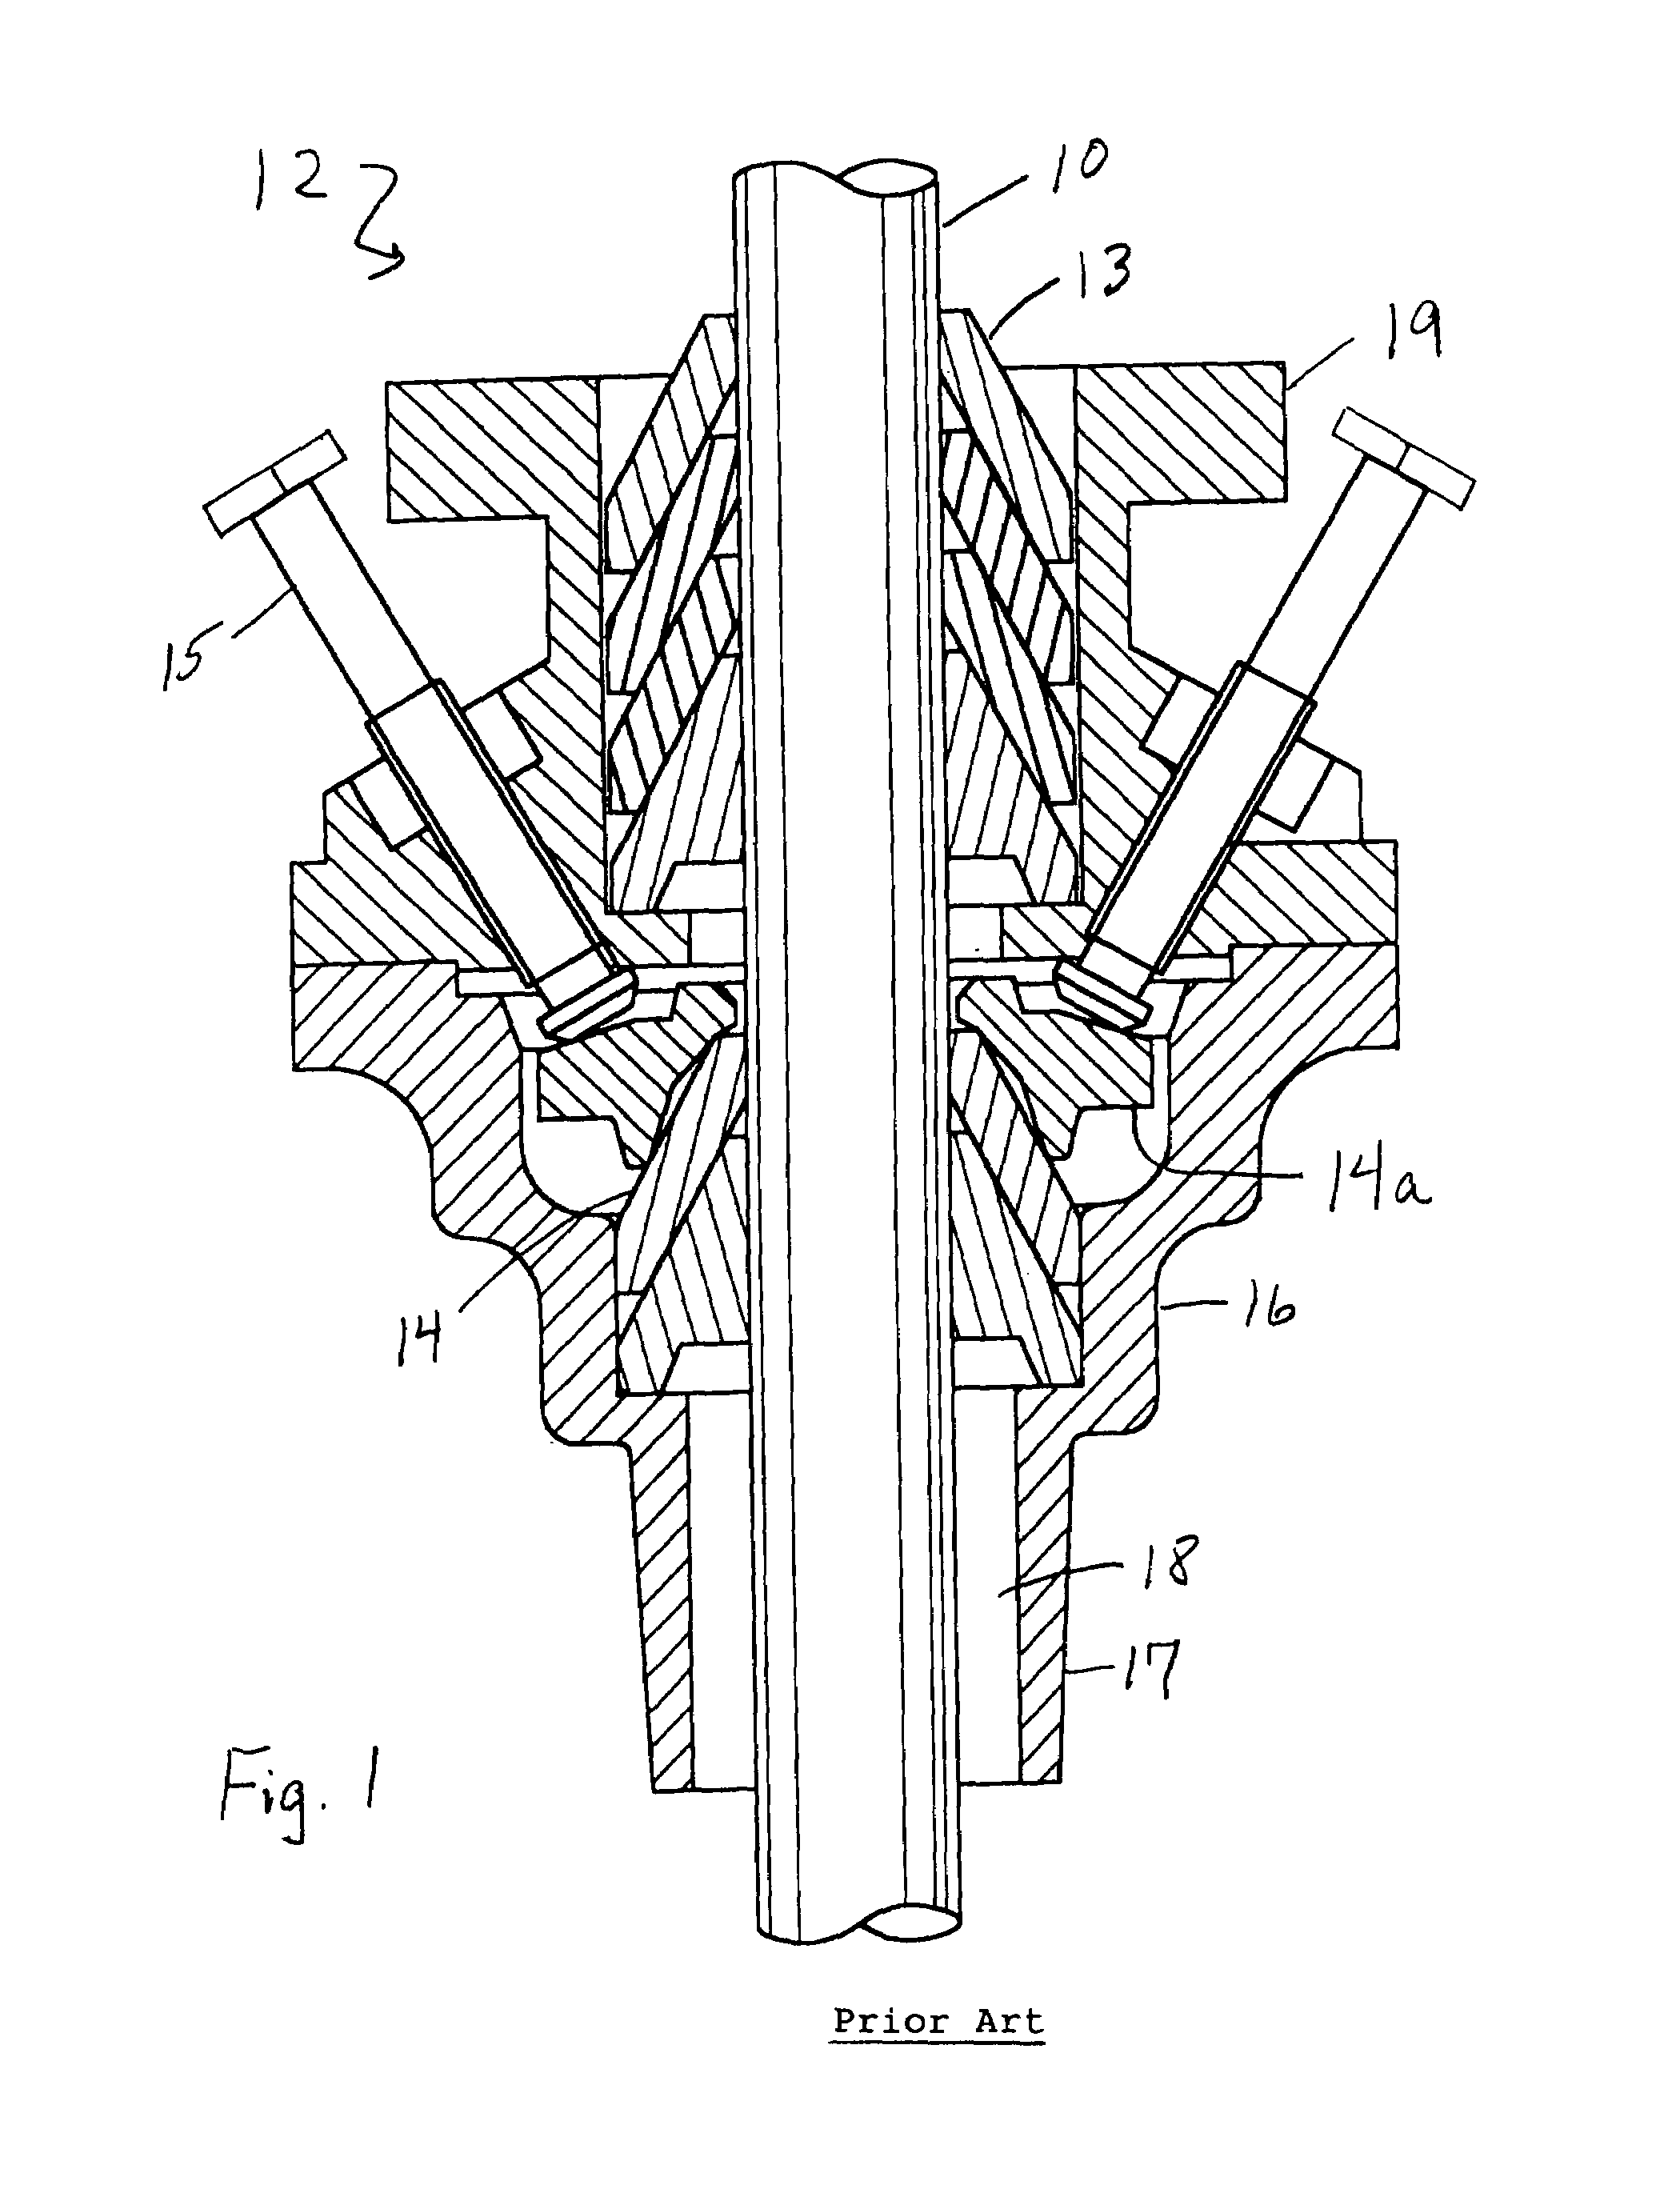 Secondary packing arrangement for reciprocating pump polished rod